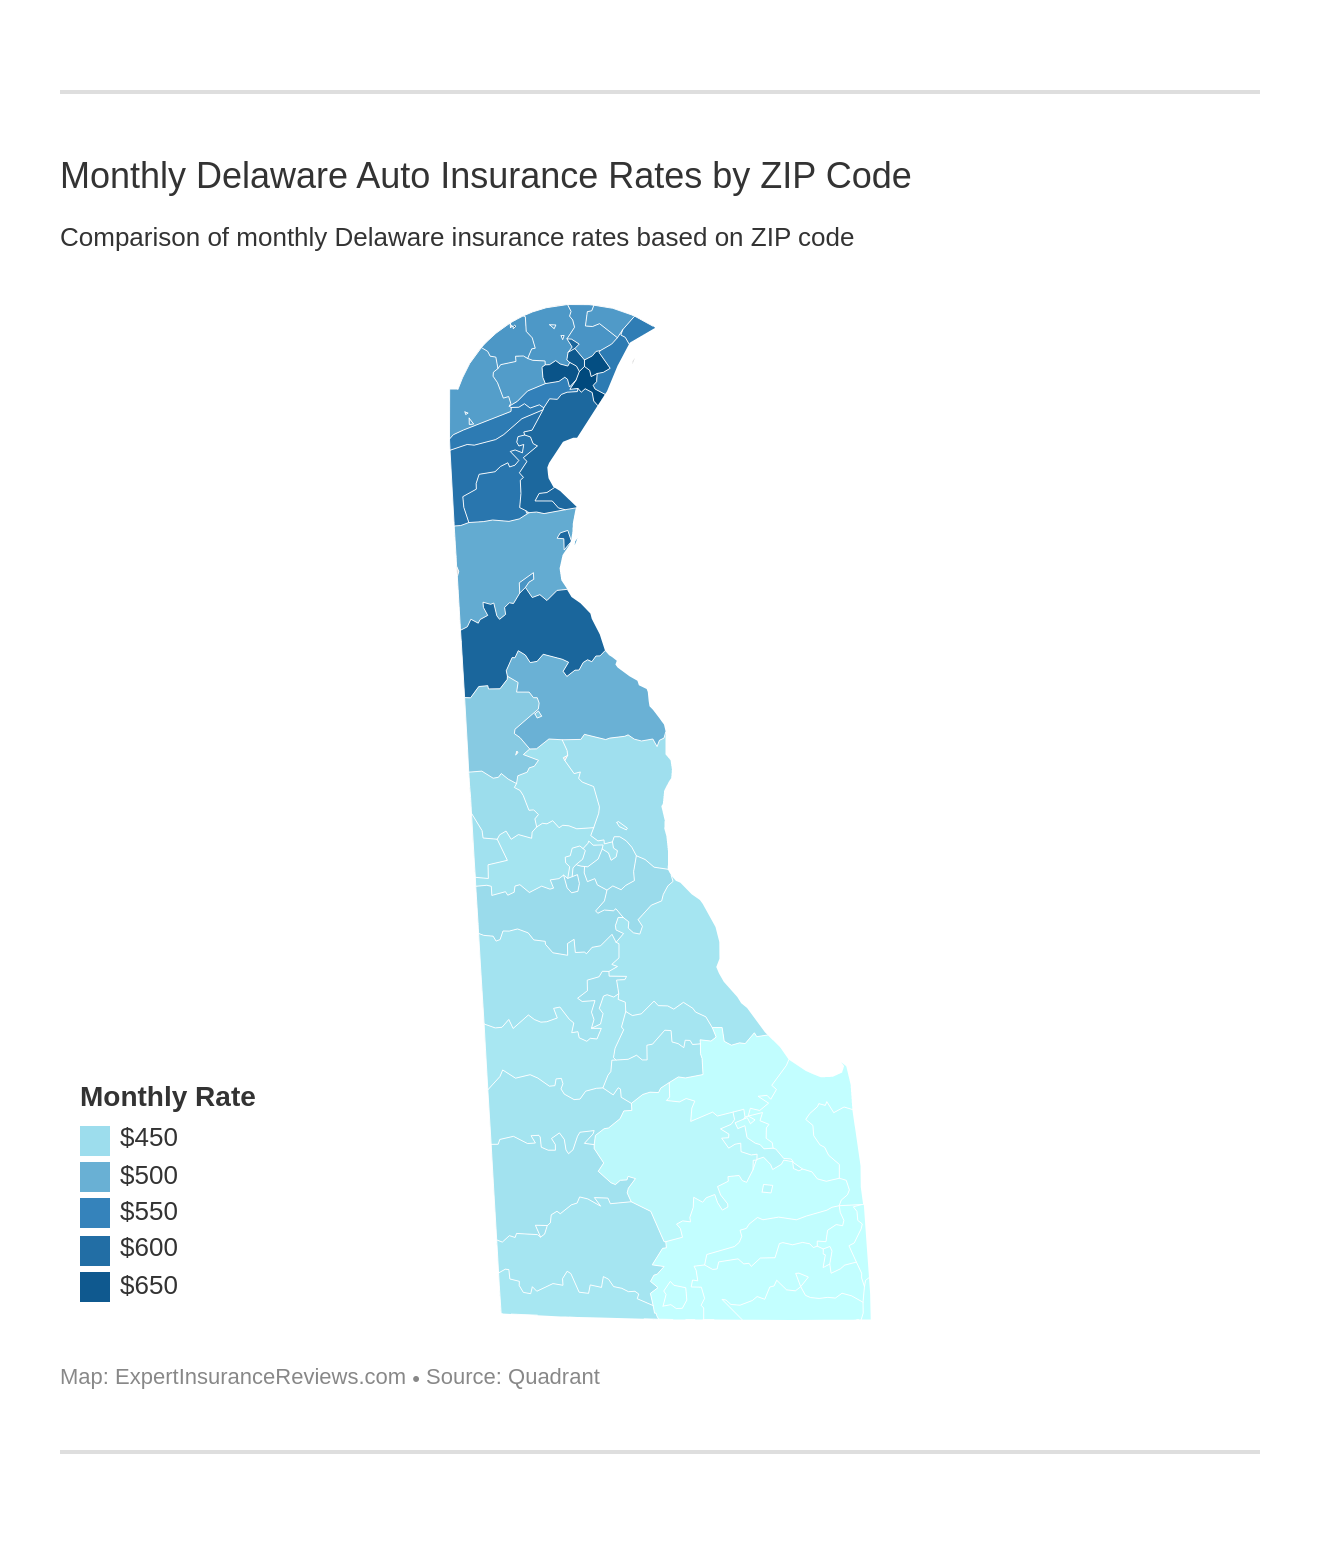 Monthly Delaware Auto Insurance Rates by ZIP Code